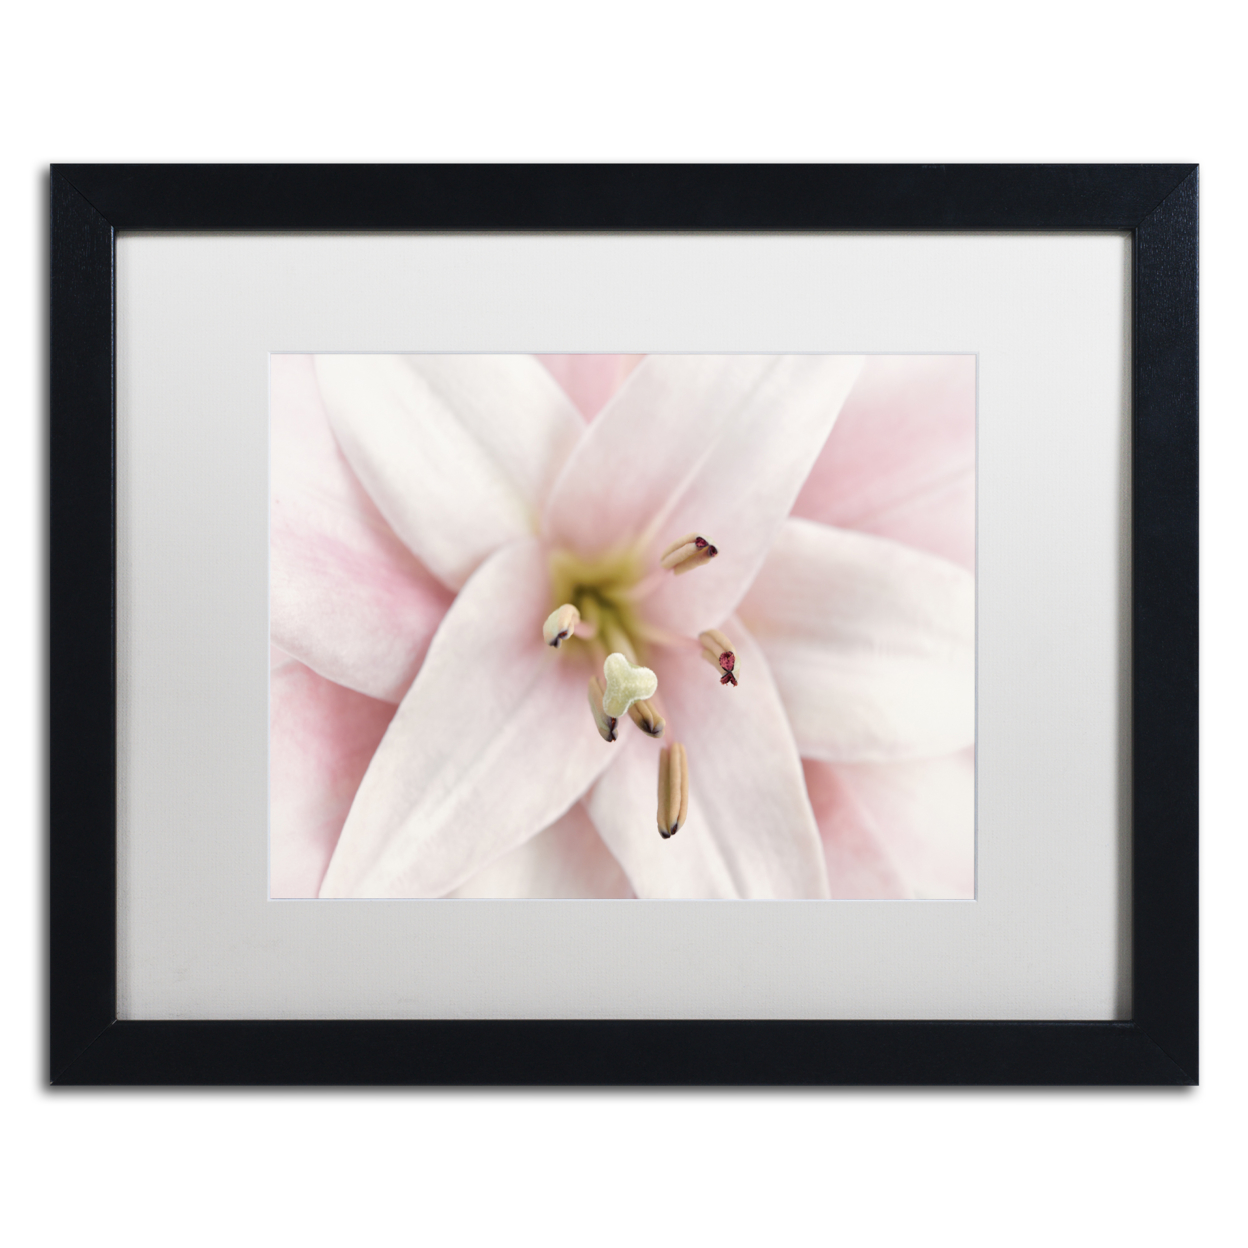 Cora Niele 'Pink Lily' Black Wooden Framed Art 18 X 22 Inches